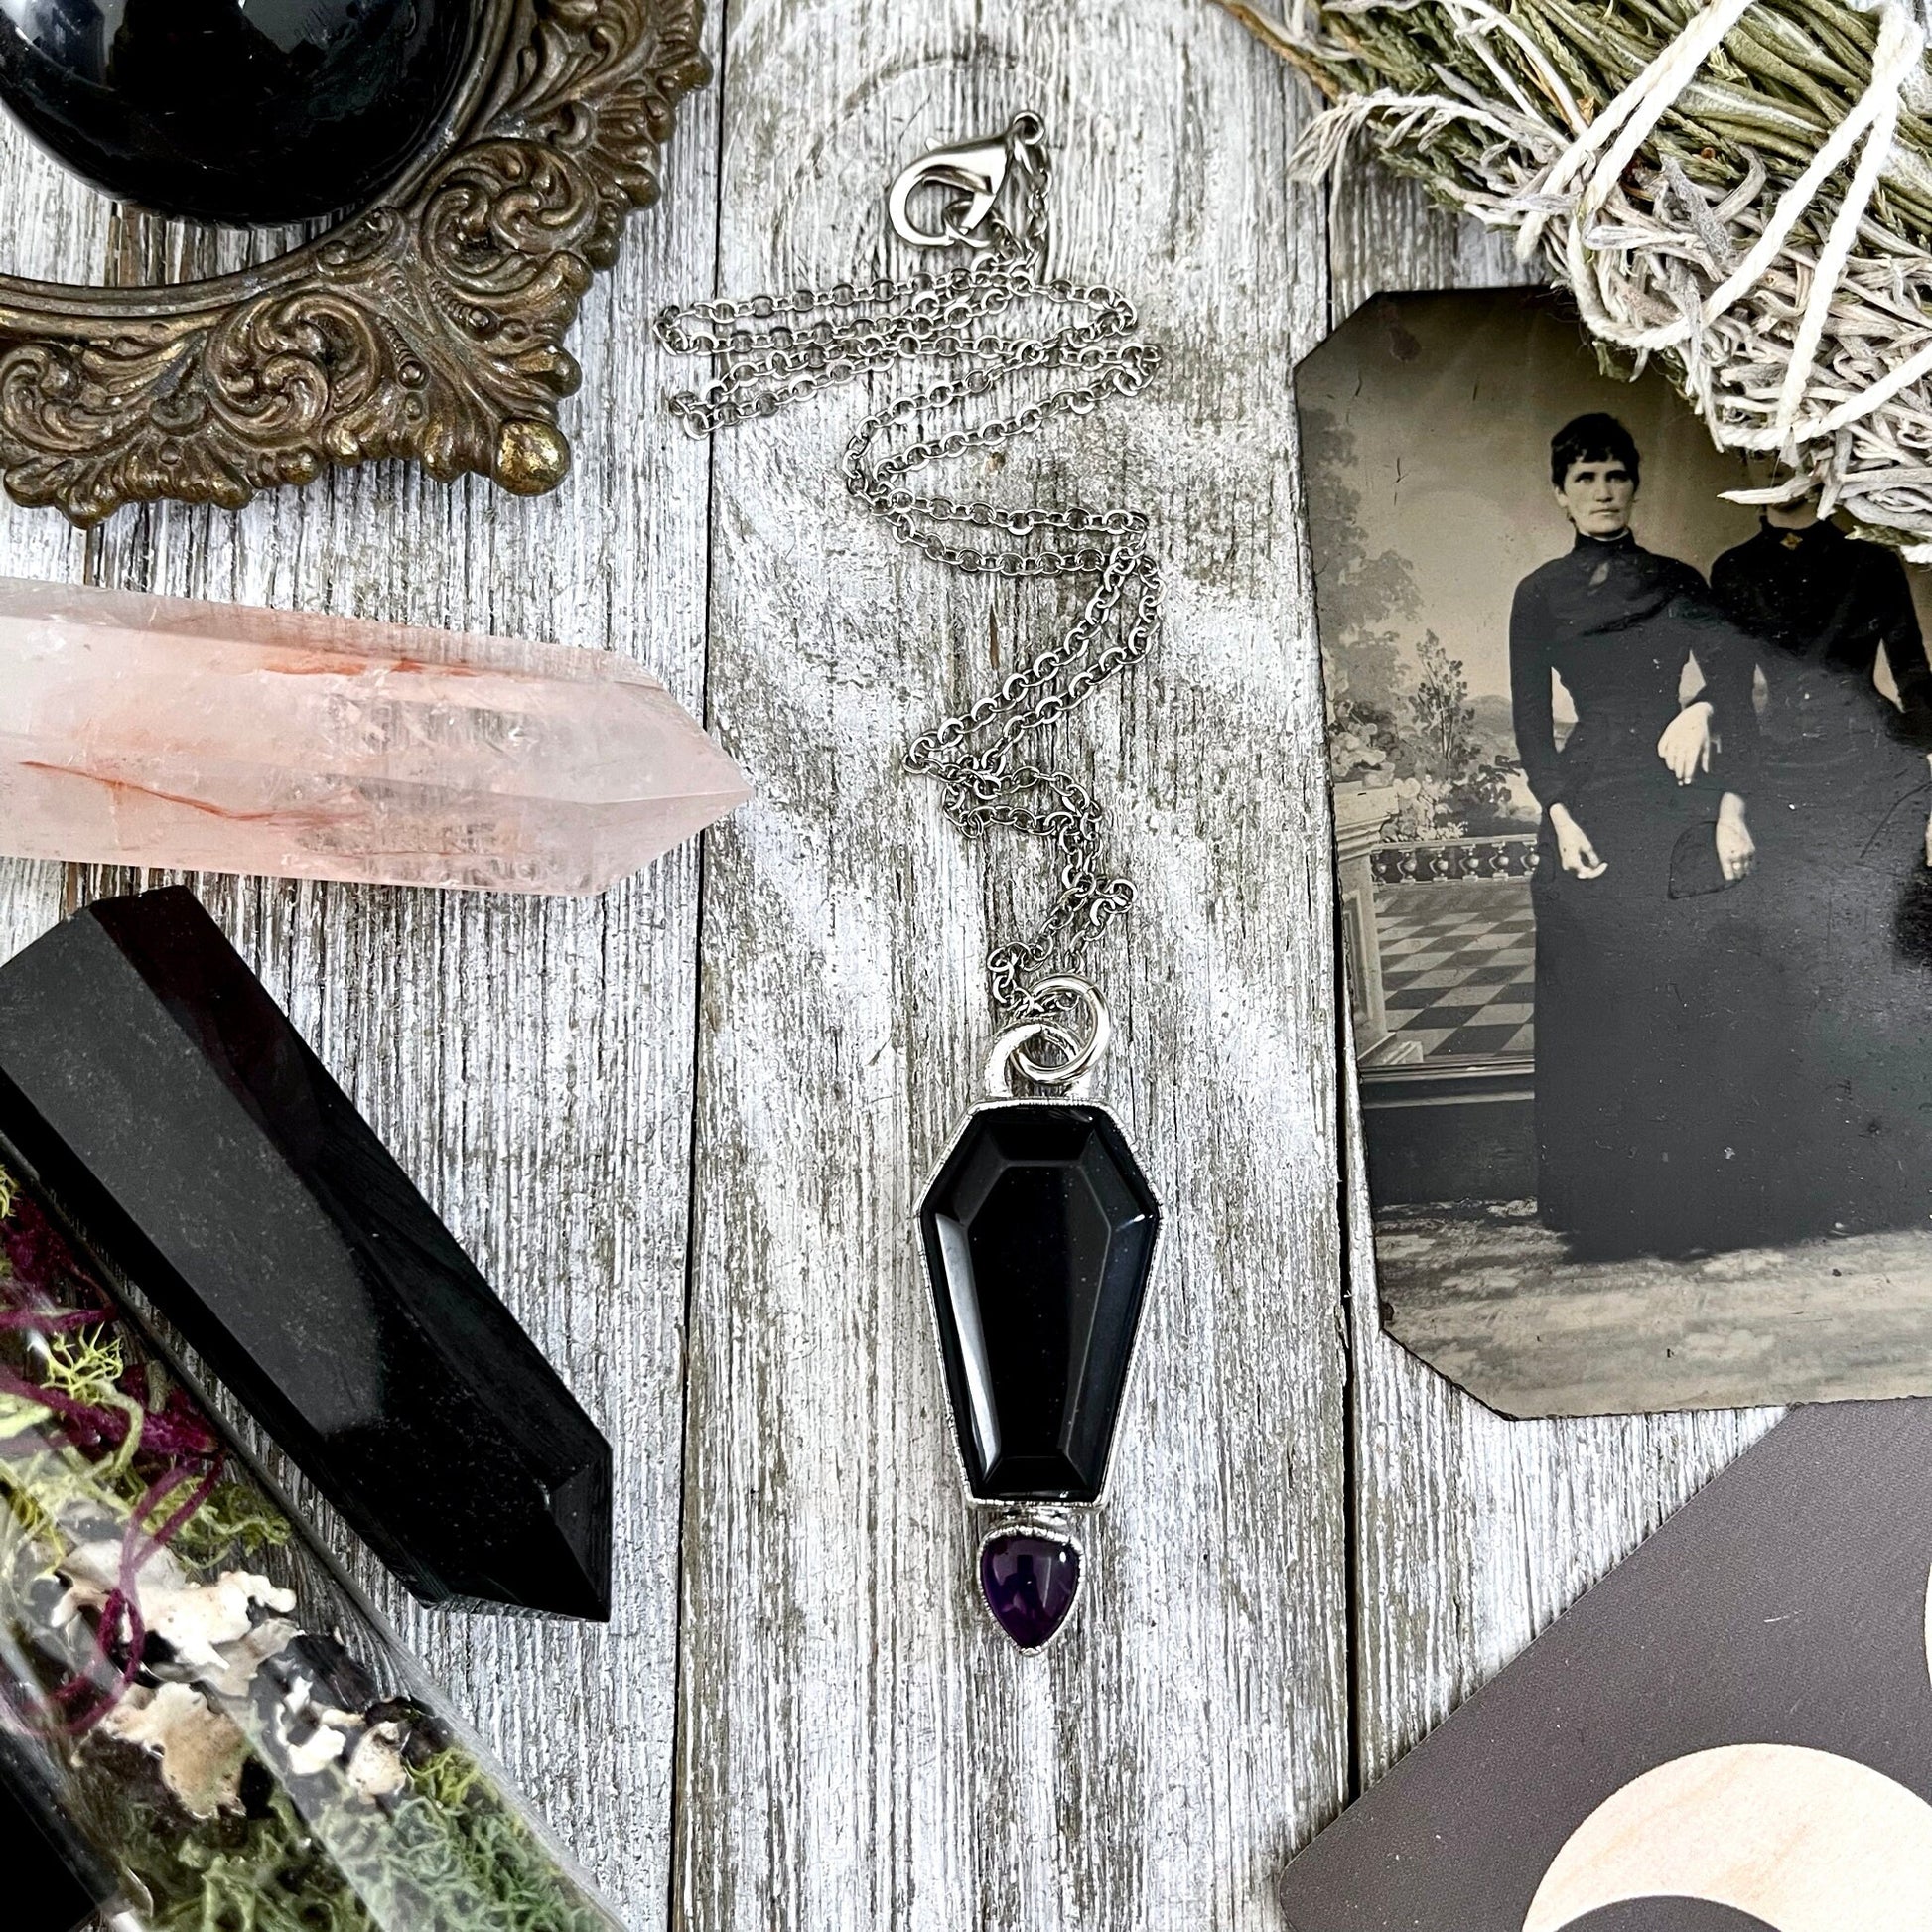 Crystal Coffin Black Onyx and Amethyst Necklace / Gothic Jewelry - Foxlark Crystal Jewelry